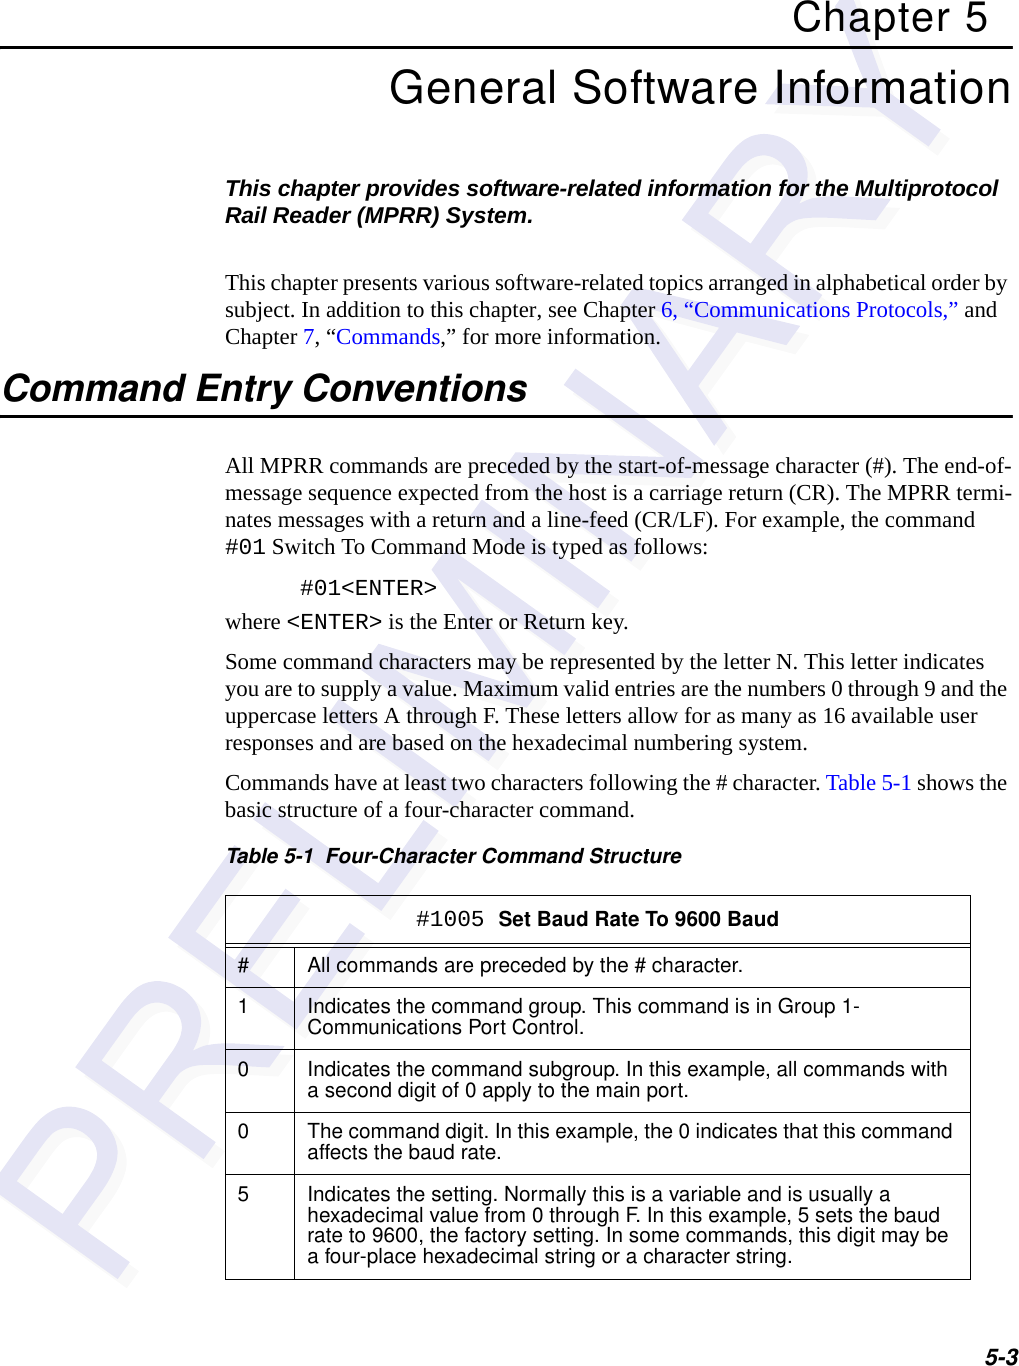 5-3Chapter 5General Software InformationThis chapter provides software-related information for the Multiprotocol Rail Reader (MPRR) System. This chapter presents various software-related topics arranged in alphabetical order by subject. In addition to this chapter, see Chapter 6, “Communications Protocols,” and Chapter 7, “Commands,” for more information.Command Entry ConventionsAll MPRR commands are preceded by the start-of-message character (#). The end-of-message sequence expected from the host is a carriage return (CR). The MPRR termi-nates messages with a return and a line-feed (CR/LF). For example, the command #01 Switch To Command Mode is typed as follows:#01&lt;ENTER&gt;where &lt;ENTER&gt; is the Enter or Return key.Some command characters may be represented by the letter N. This letter indicates you are to supply a value. Maximum valid entries are the numbers 0 through 9 and the uppercase letters A through F. These letters allow for as many as 16 available user responses and are based on the hexadecimal numbering system. Commands have at least two characters following the # character. Table 5-1 shows the basic structure of a four-character command.Table 5-1  Four-Character Command Structure#1005 Set Baud Rate To 9600 Baud# All commands are preceded by the # character.1 Indicates the command group. This command is in Group 1- Communications Port Control.0 Indicates the command subgroup. In this example, all commands with a second digit of 0 apply to the main port.0 The command digit. In this example, the 0 indicates that this command affects the baud rate.5 Indicates the setting. Normally this is a variable and is usually a hexadecimal value from 0 through F. In this example, 5 sets the baud rate to 9600, the factory setting. In some commands, this digit may be a four-place hexadecimal string or a character string.